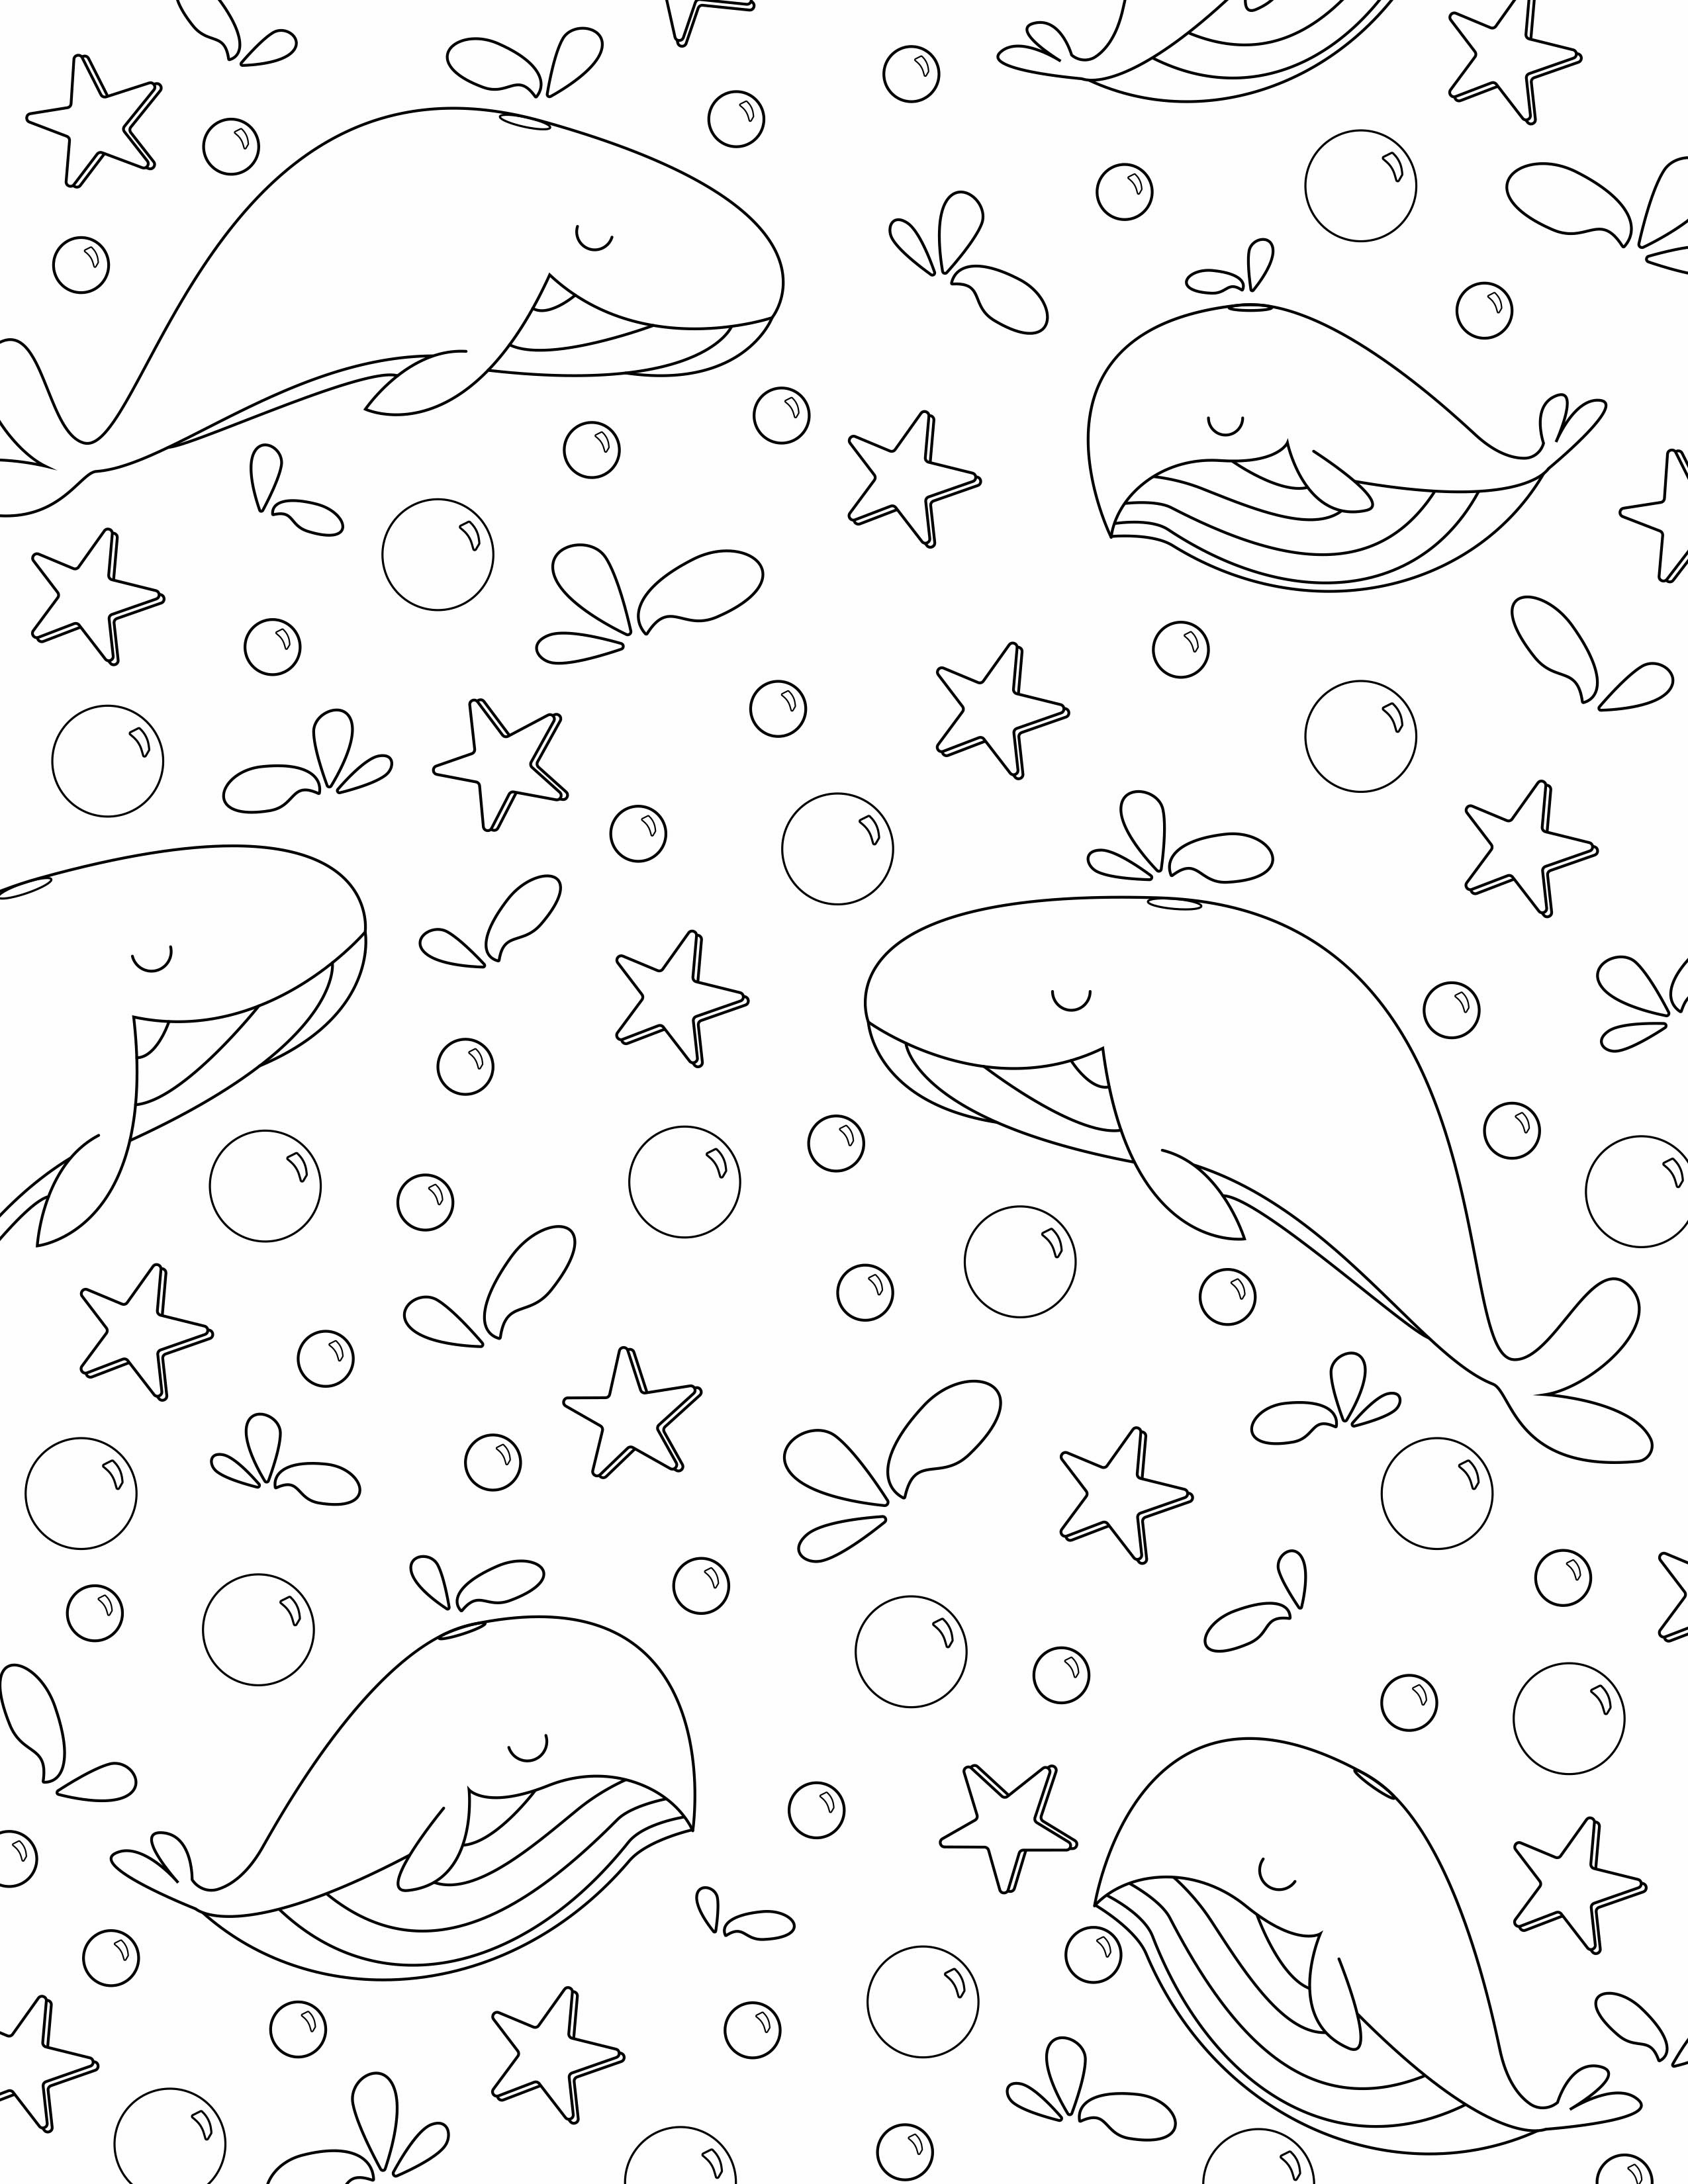 Whales and forest coloring pages